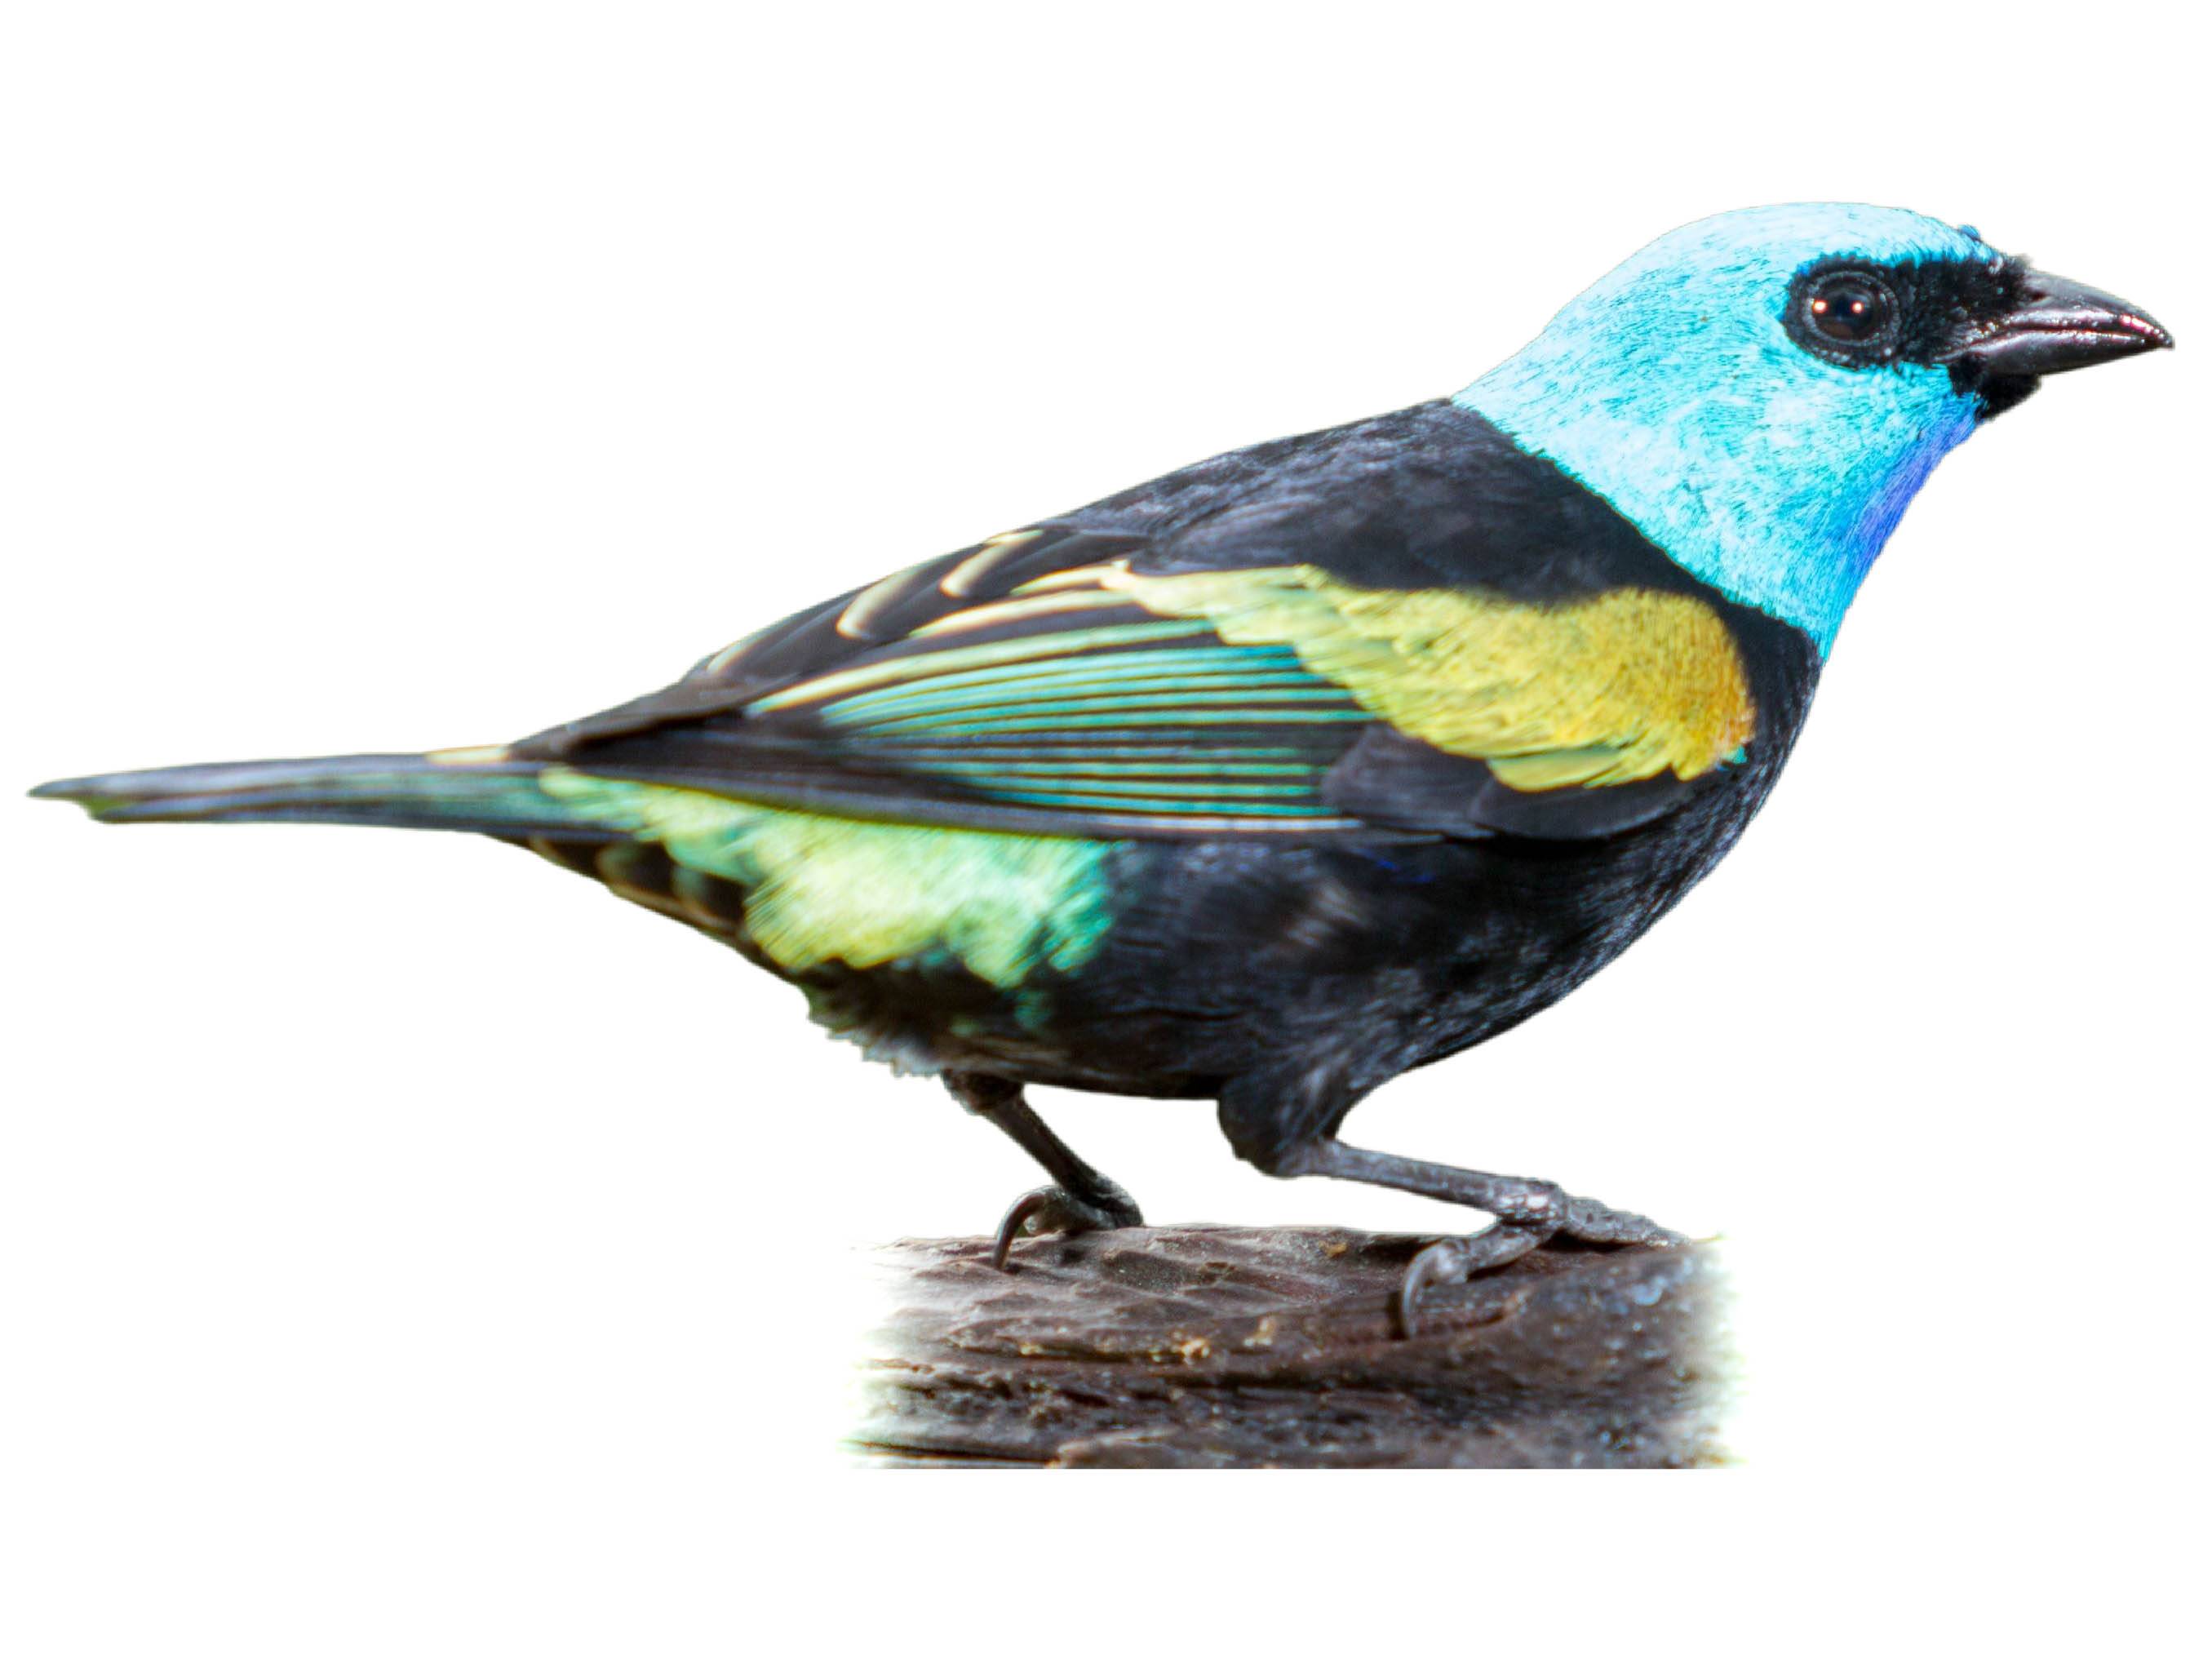 A photo of a Blue-necked Tanager (Stilpnia cyanicollis)